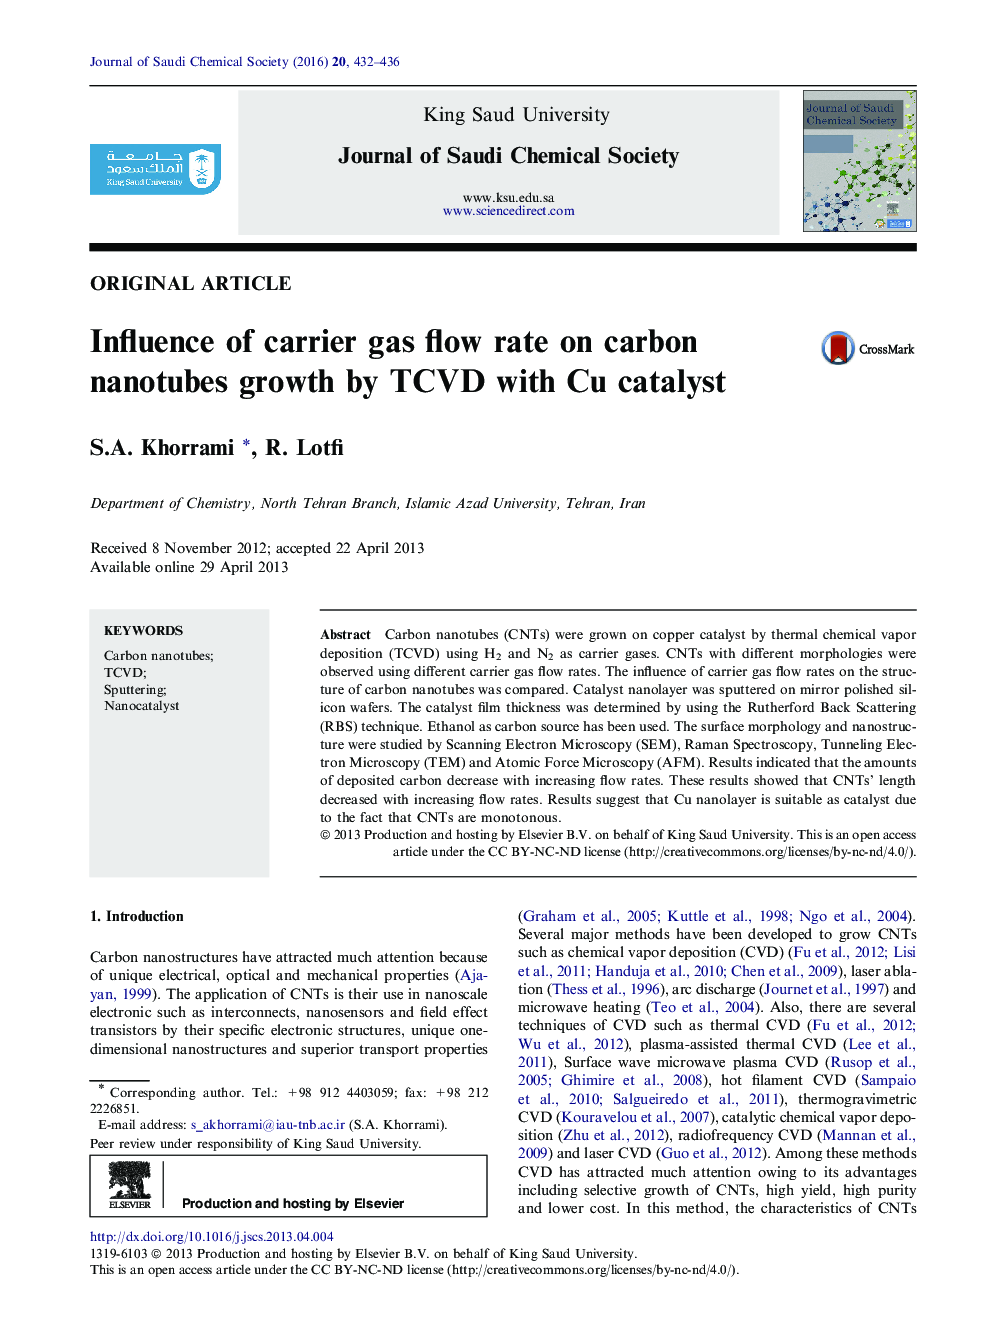 Influence of carrier gas flow rate on carbon nanotubes growth by TCVD with Cu catalyst 